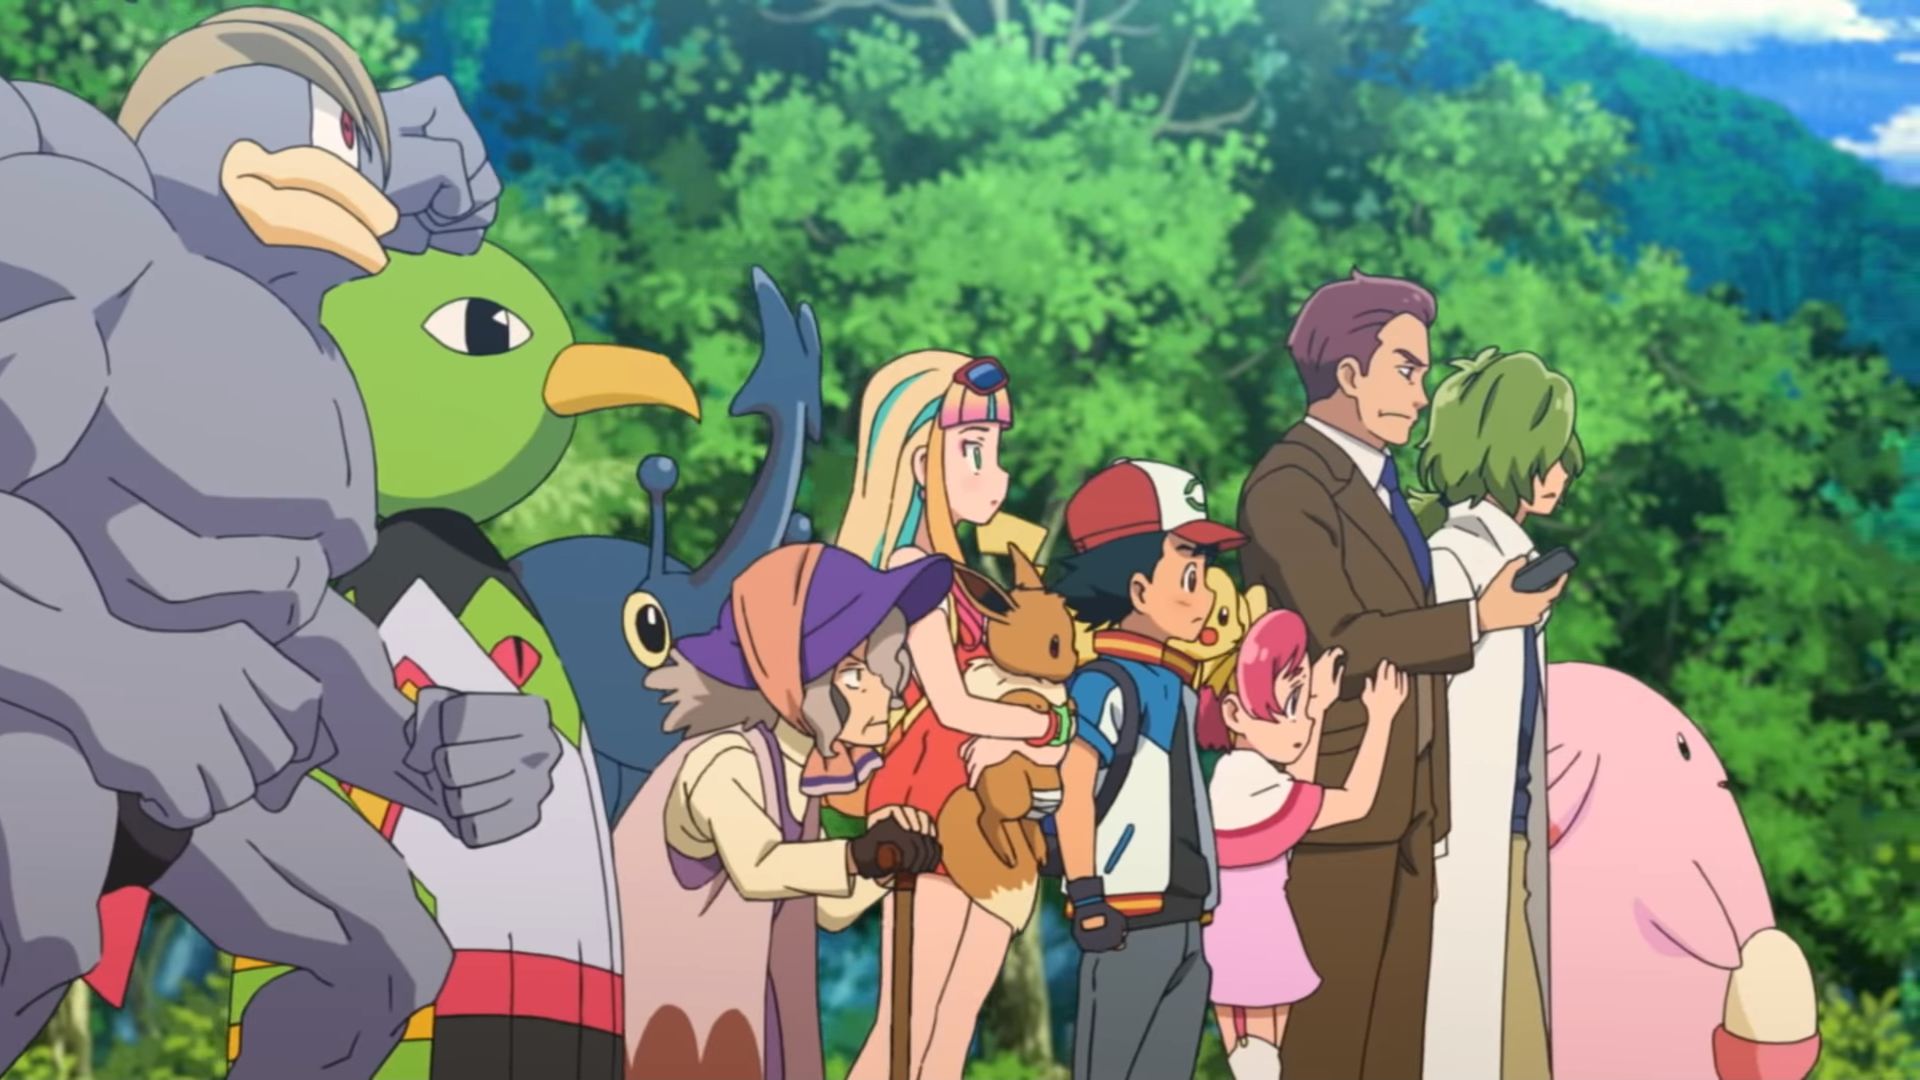 Pokémon the Movie_ The Power of Us—Full Trailer 0-34 screenshot.png